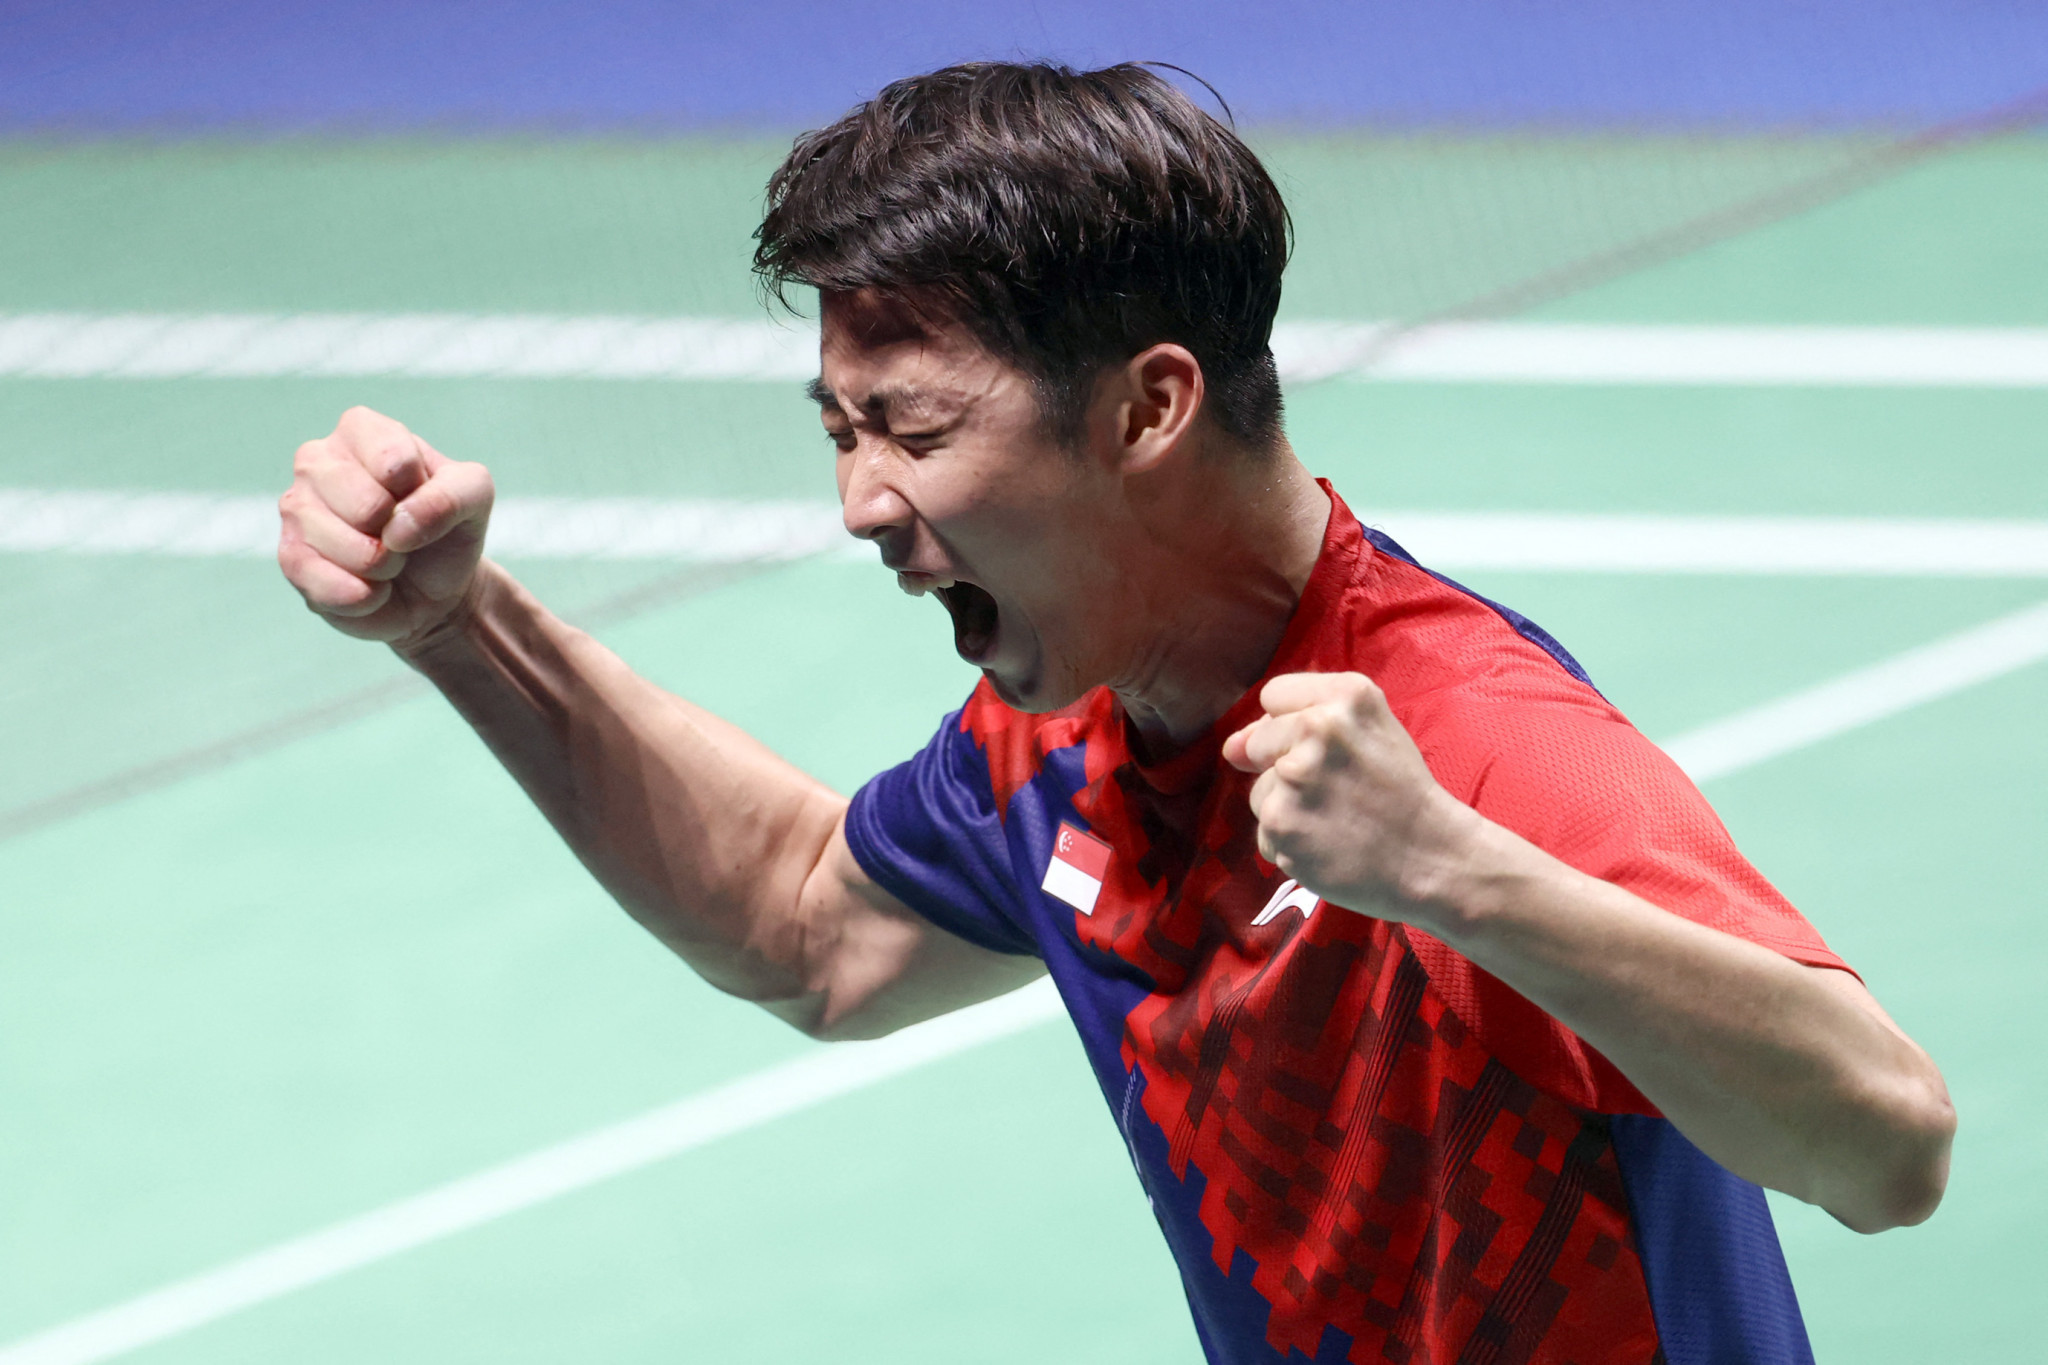 Loh Kean Yew is the reigning men's singles badminton world champion ©Getty Images